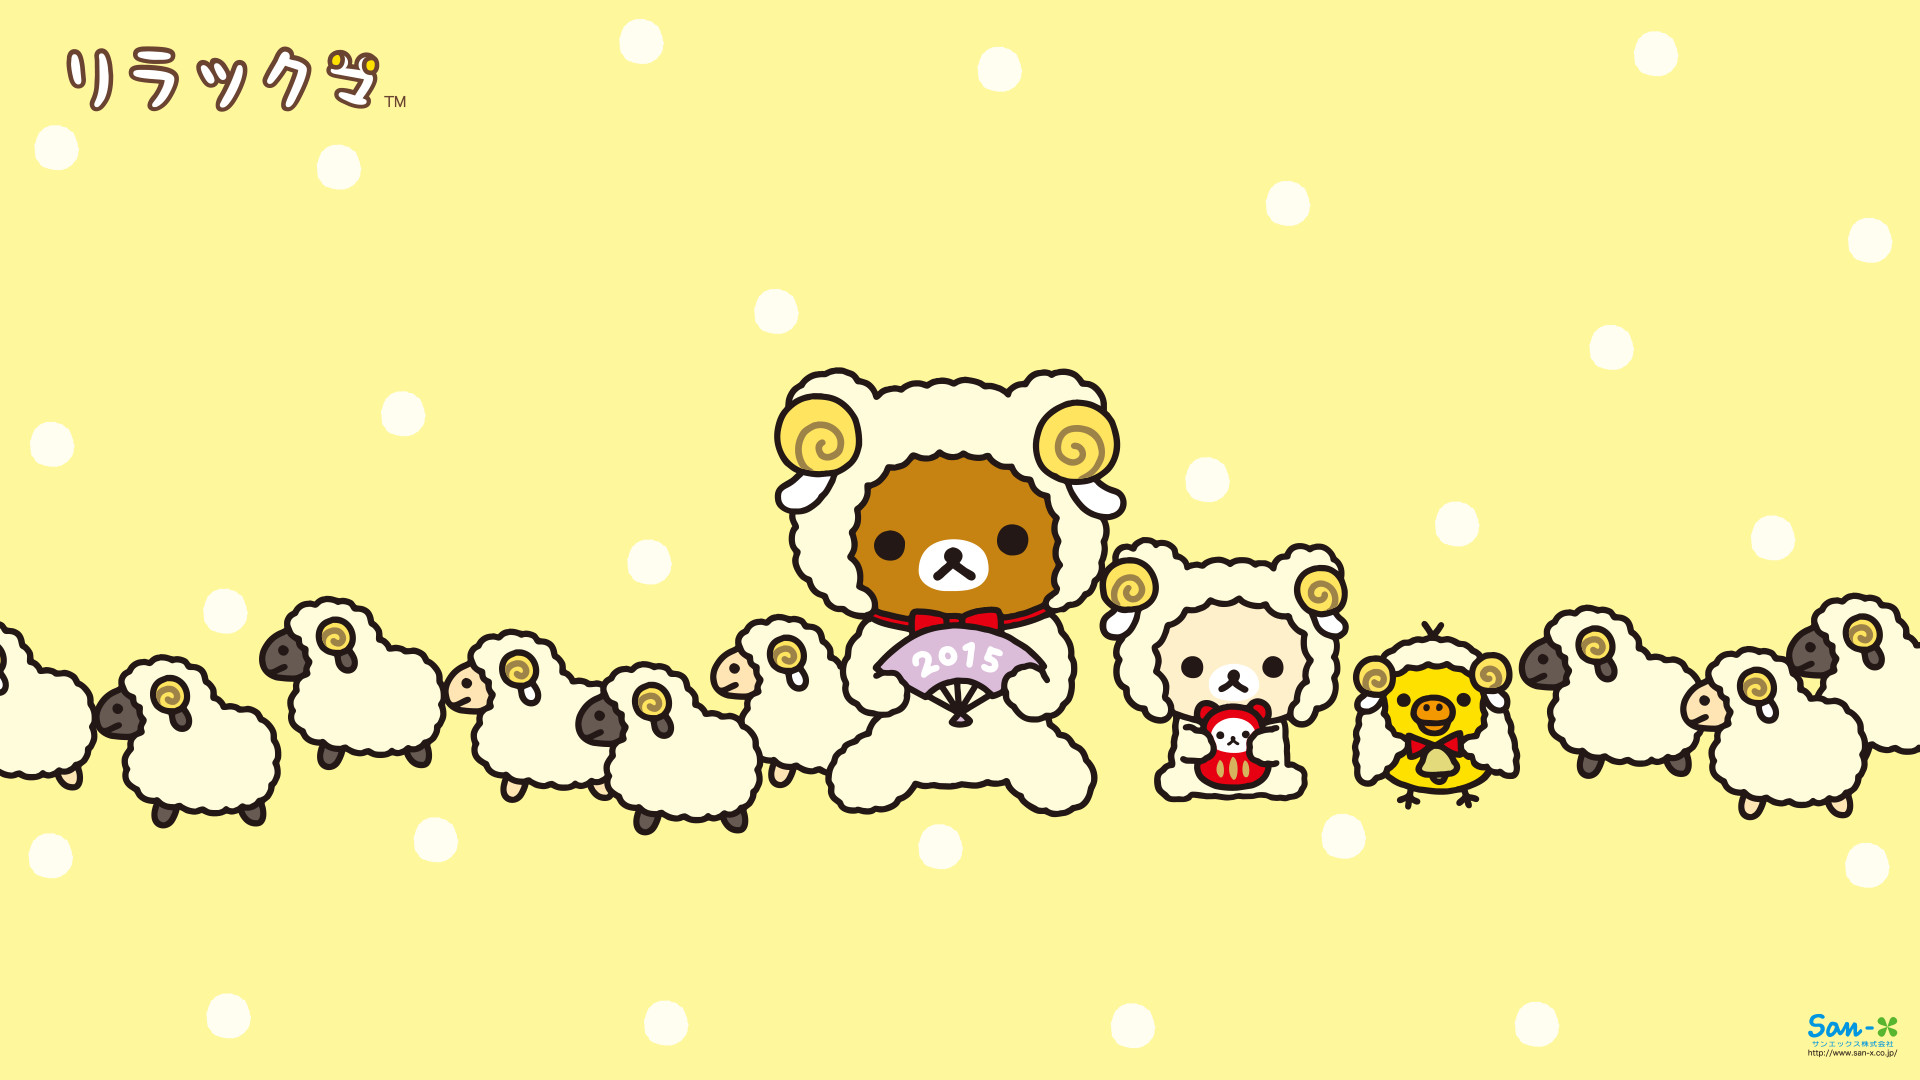 Happy Year of the Sheep – you can download this wallpaper for free